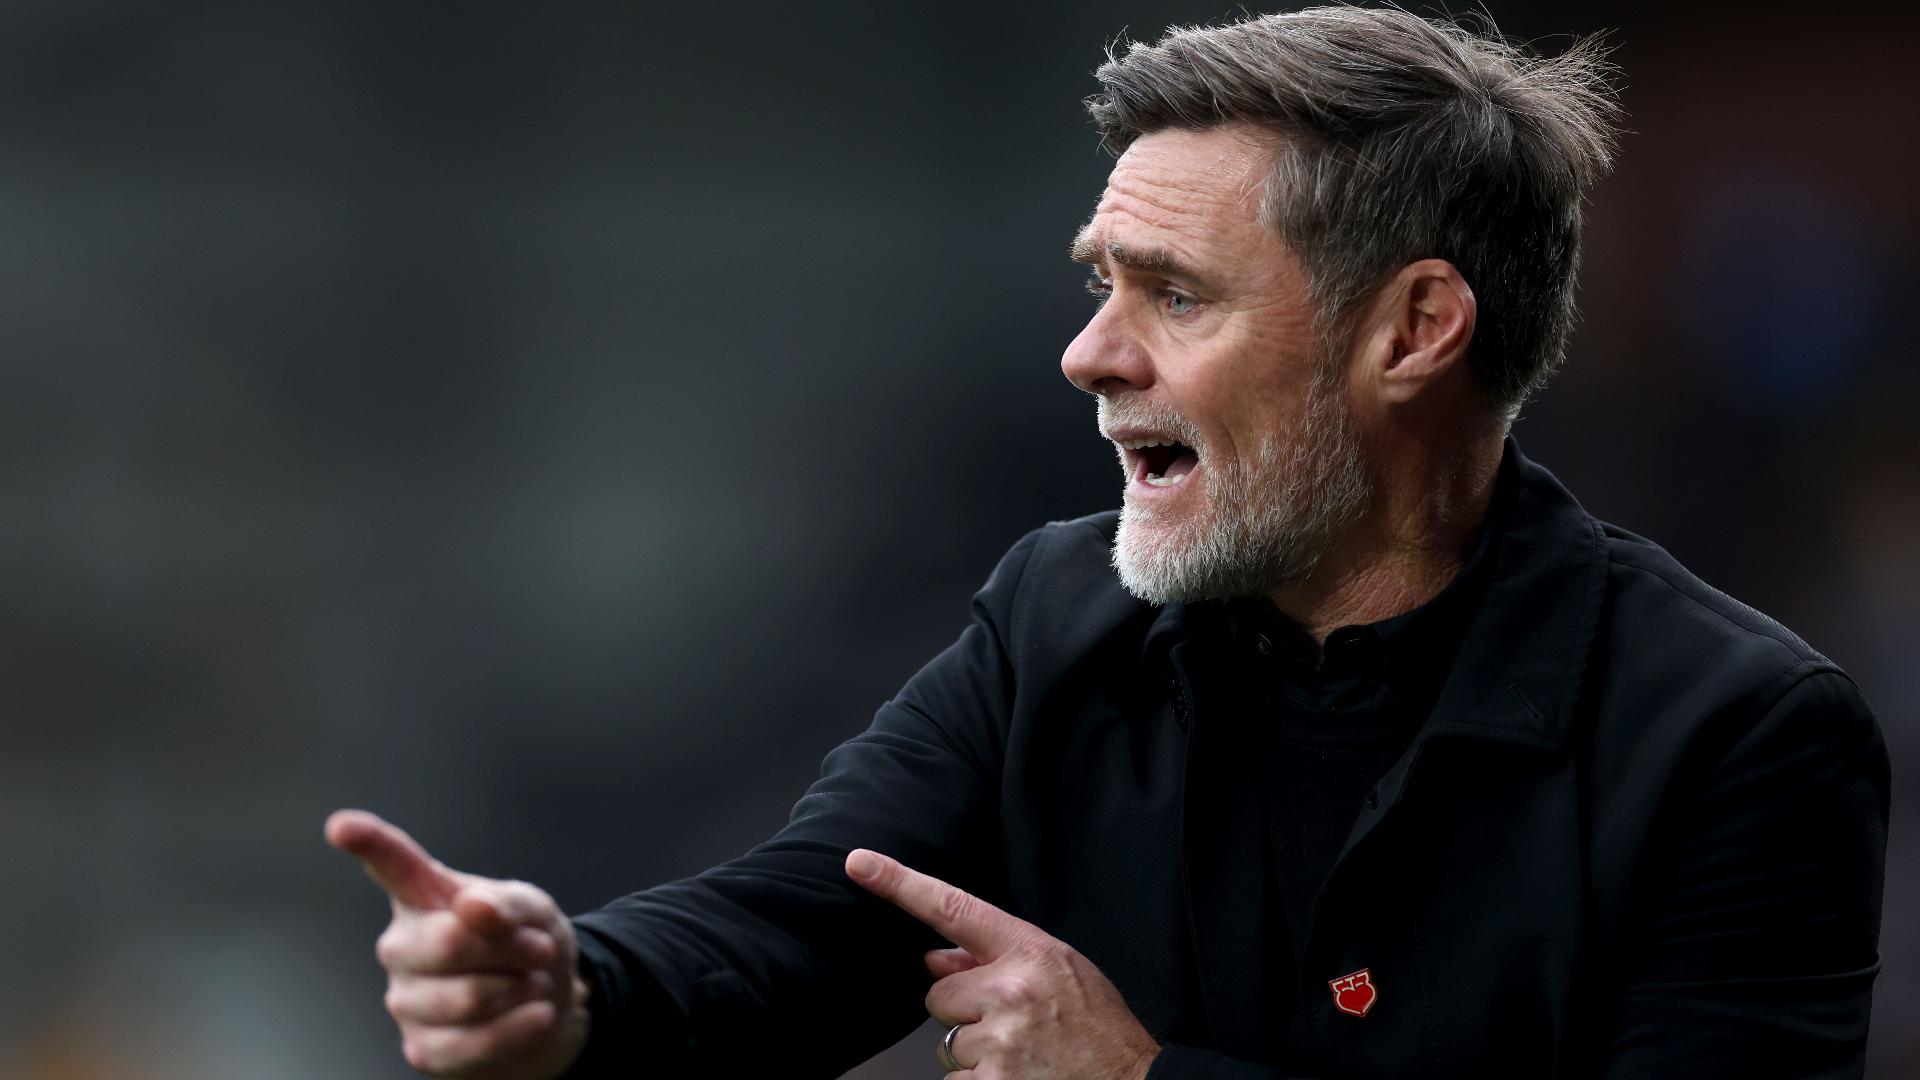 Graham Alexander feels Bradford were good value for his first league win |  beIN SPORTS